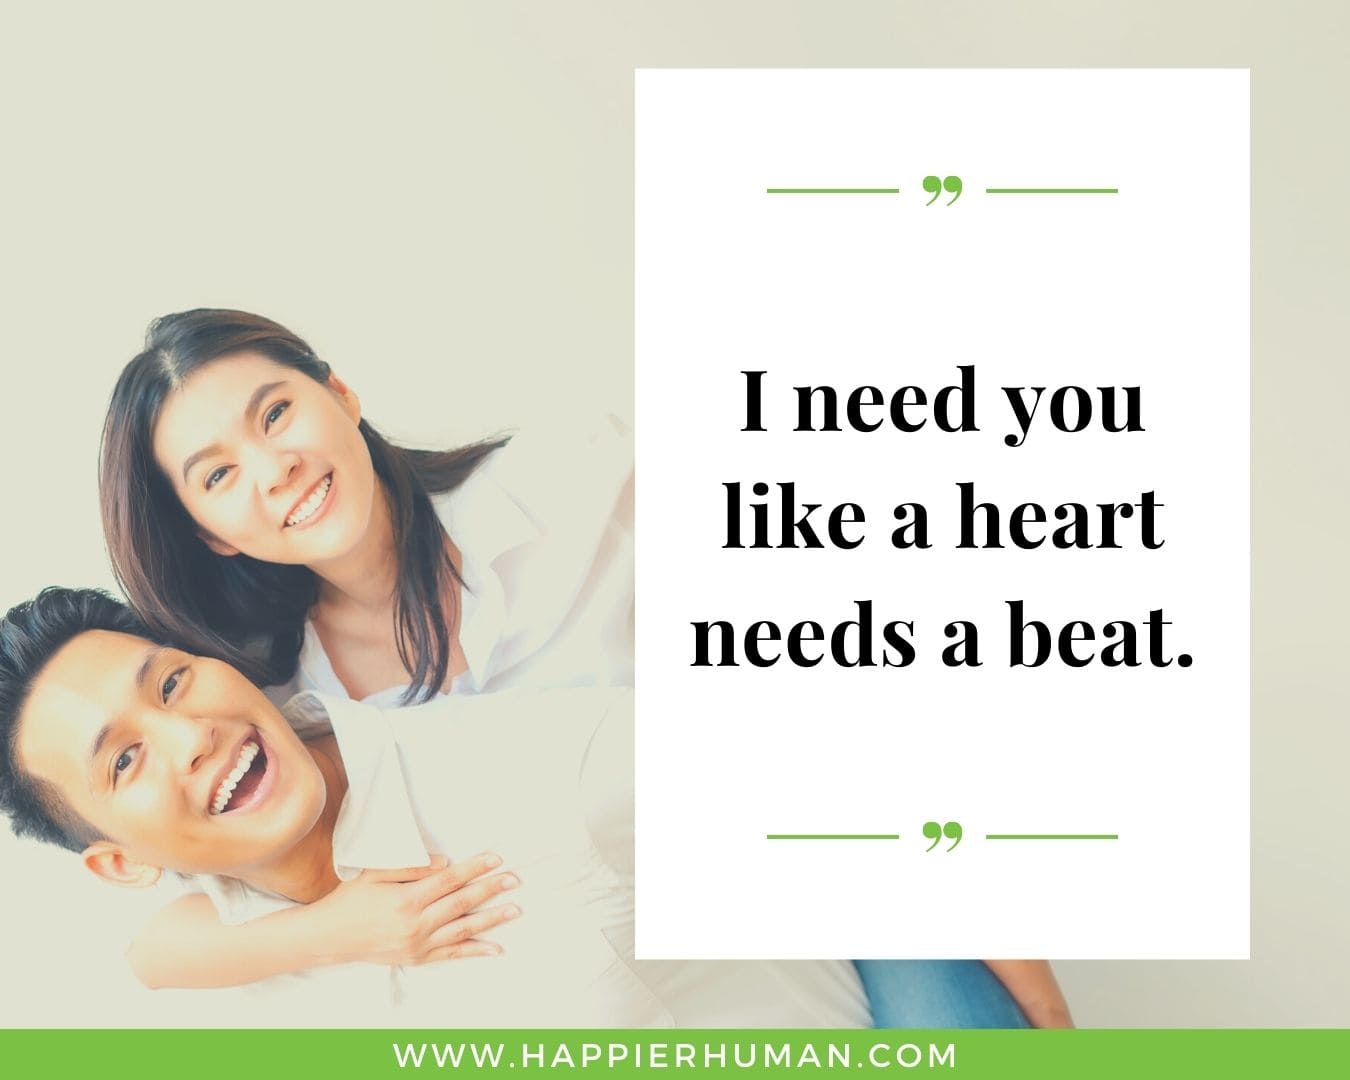 Funny Love Quotes for Her - “I need you like a heart needs a beat.”